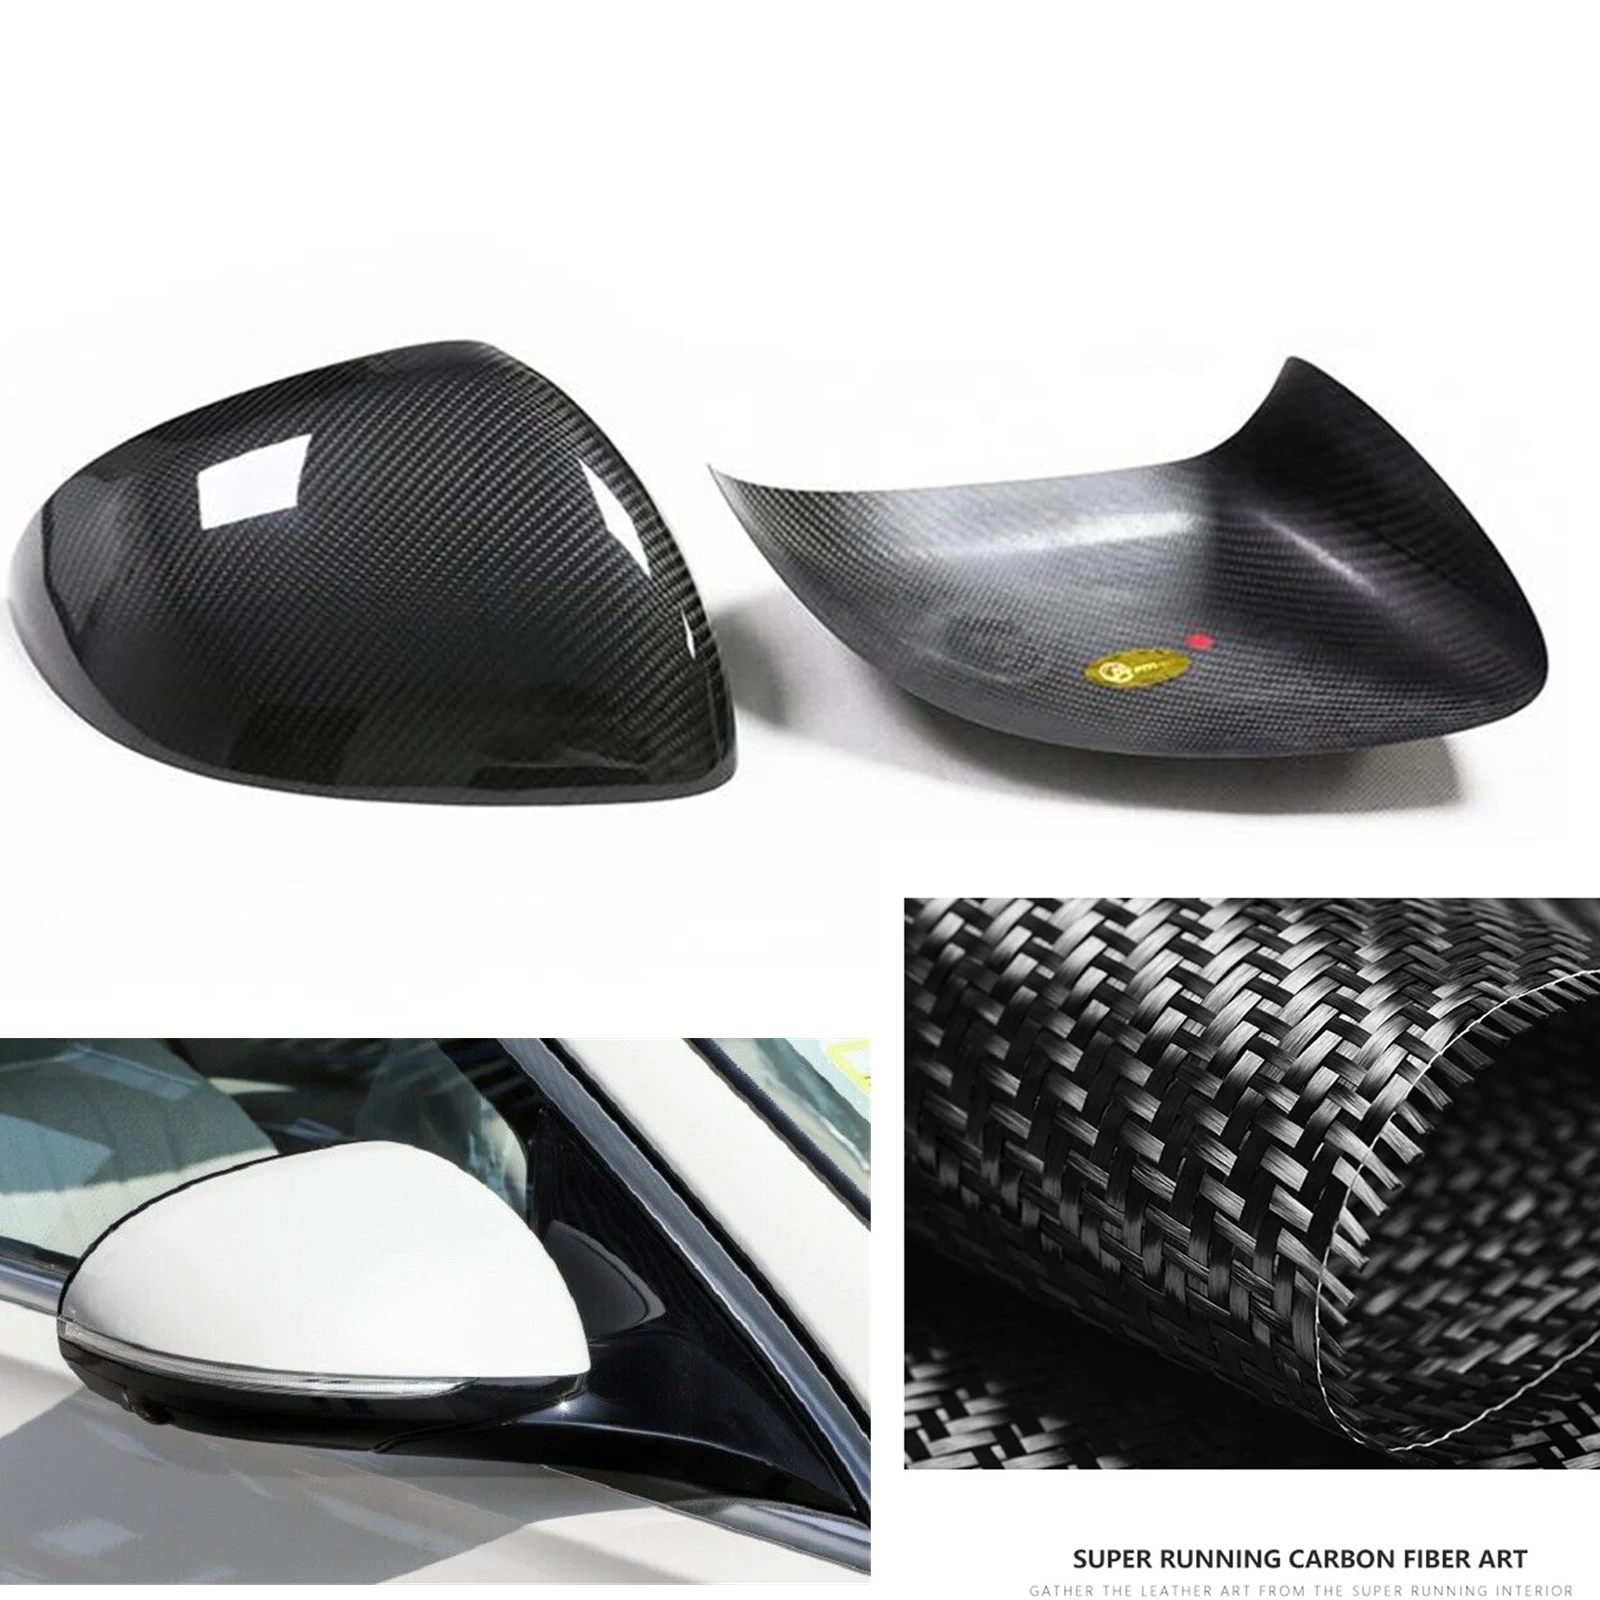 

For Mercedes Benz C-Class W206 S-Class S400L W223 2021 Mirror Cover Dry Carbon Fiber Car Exterior Rear View Caps Shell Add On